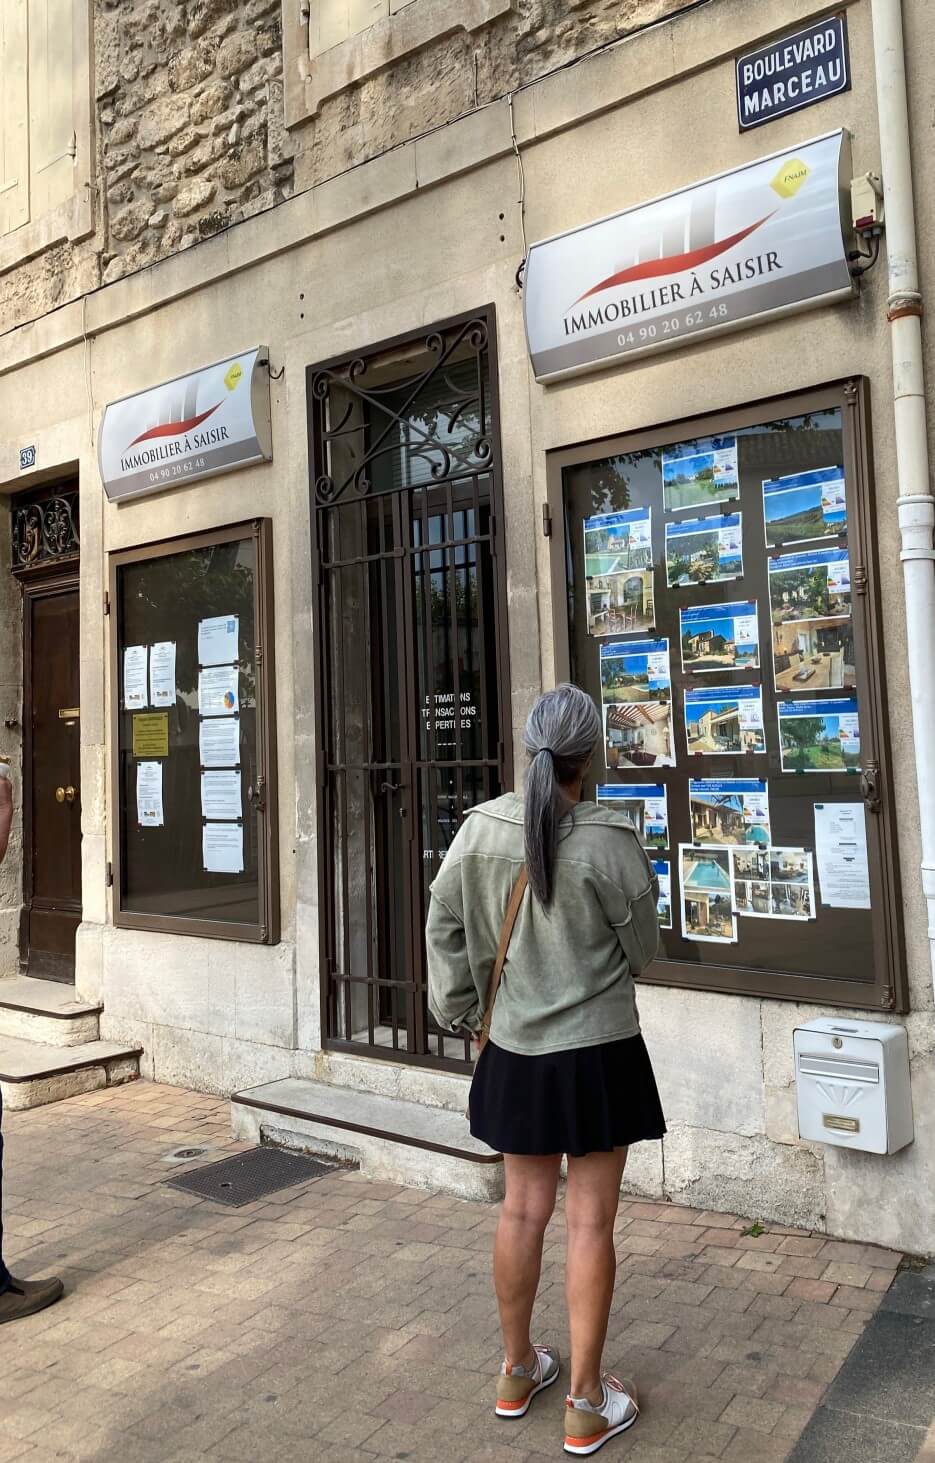 View of the listings in the window of a real estate office in Paris